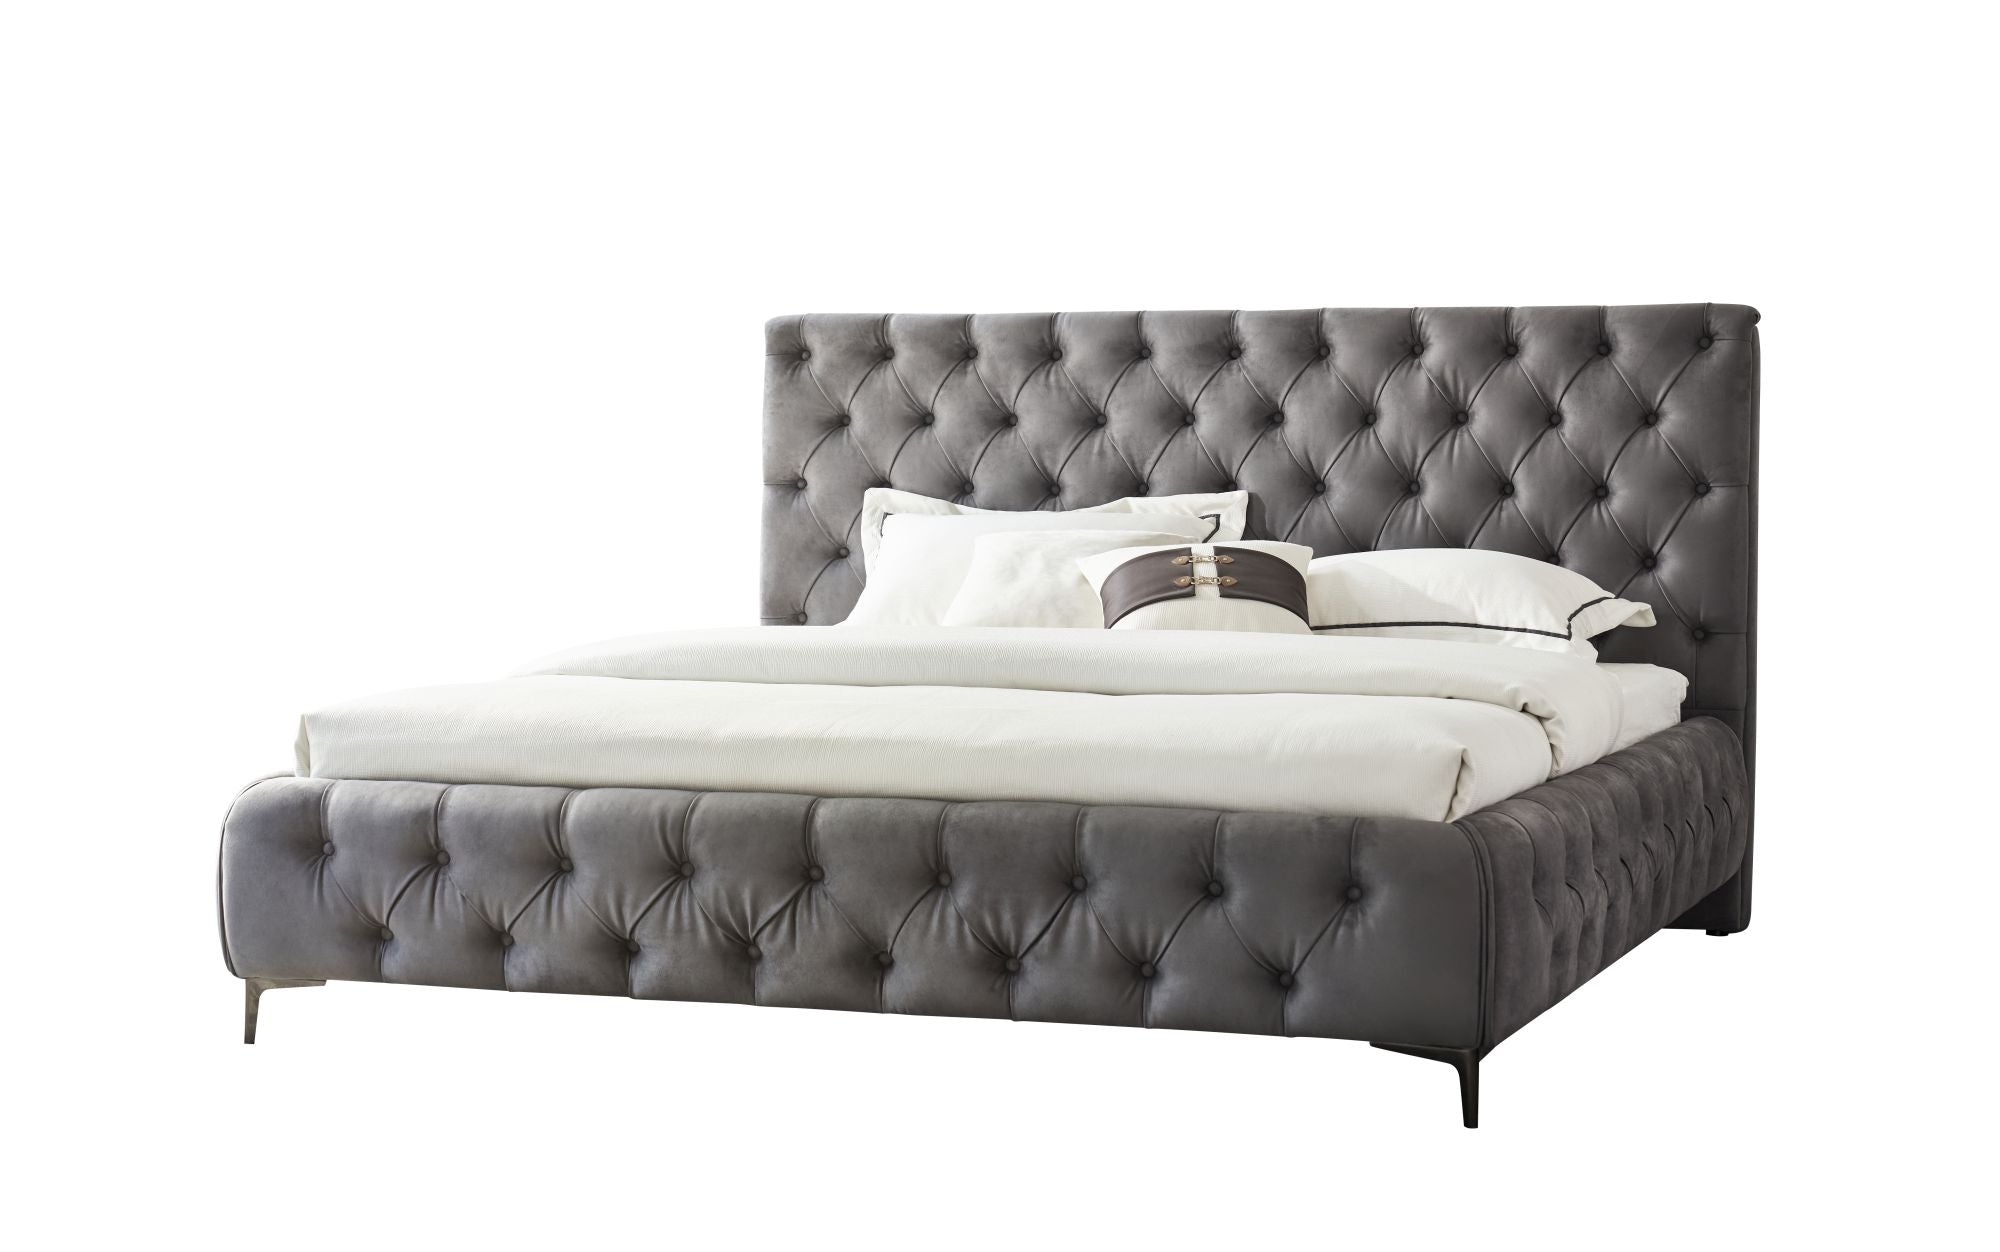 Royal bedframe angled view in Grey on white back ground 